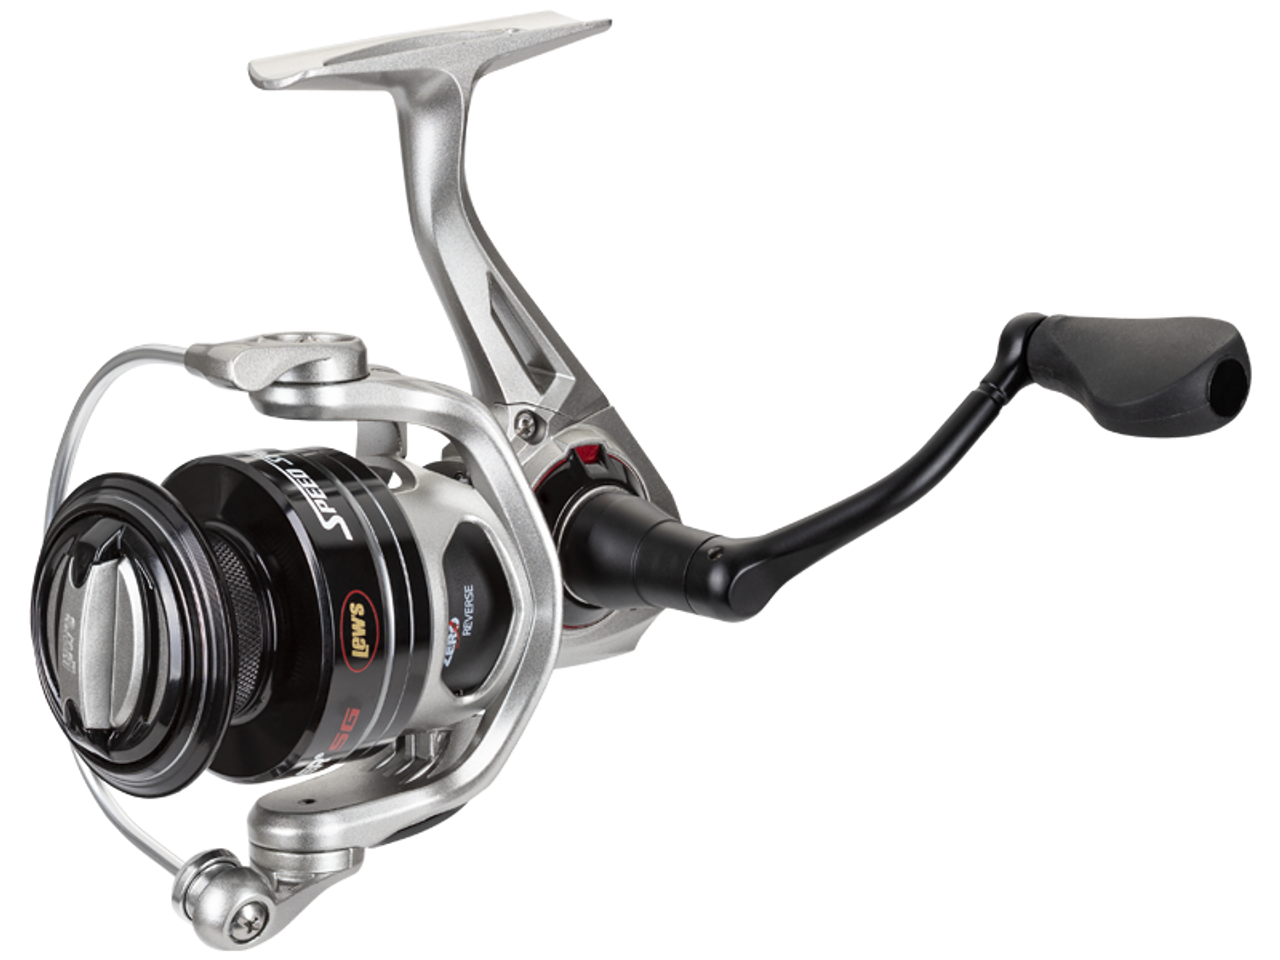 Lew's Laser Sg Speed Spin Spinning Reel LSG300A 5.2:1